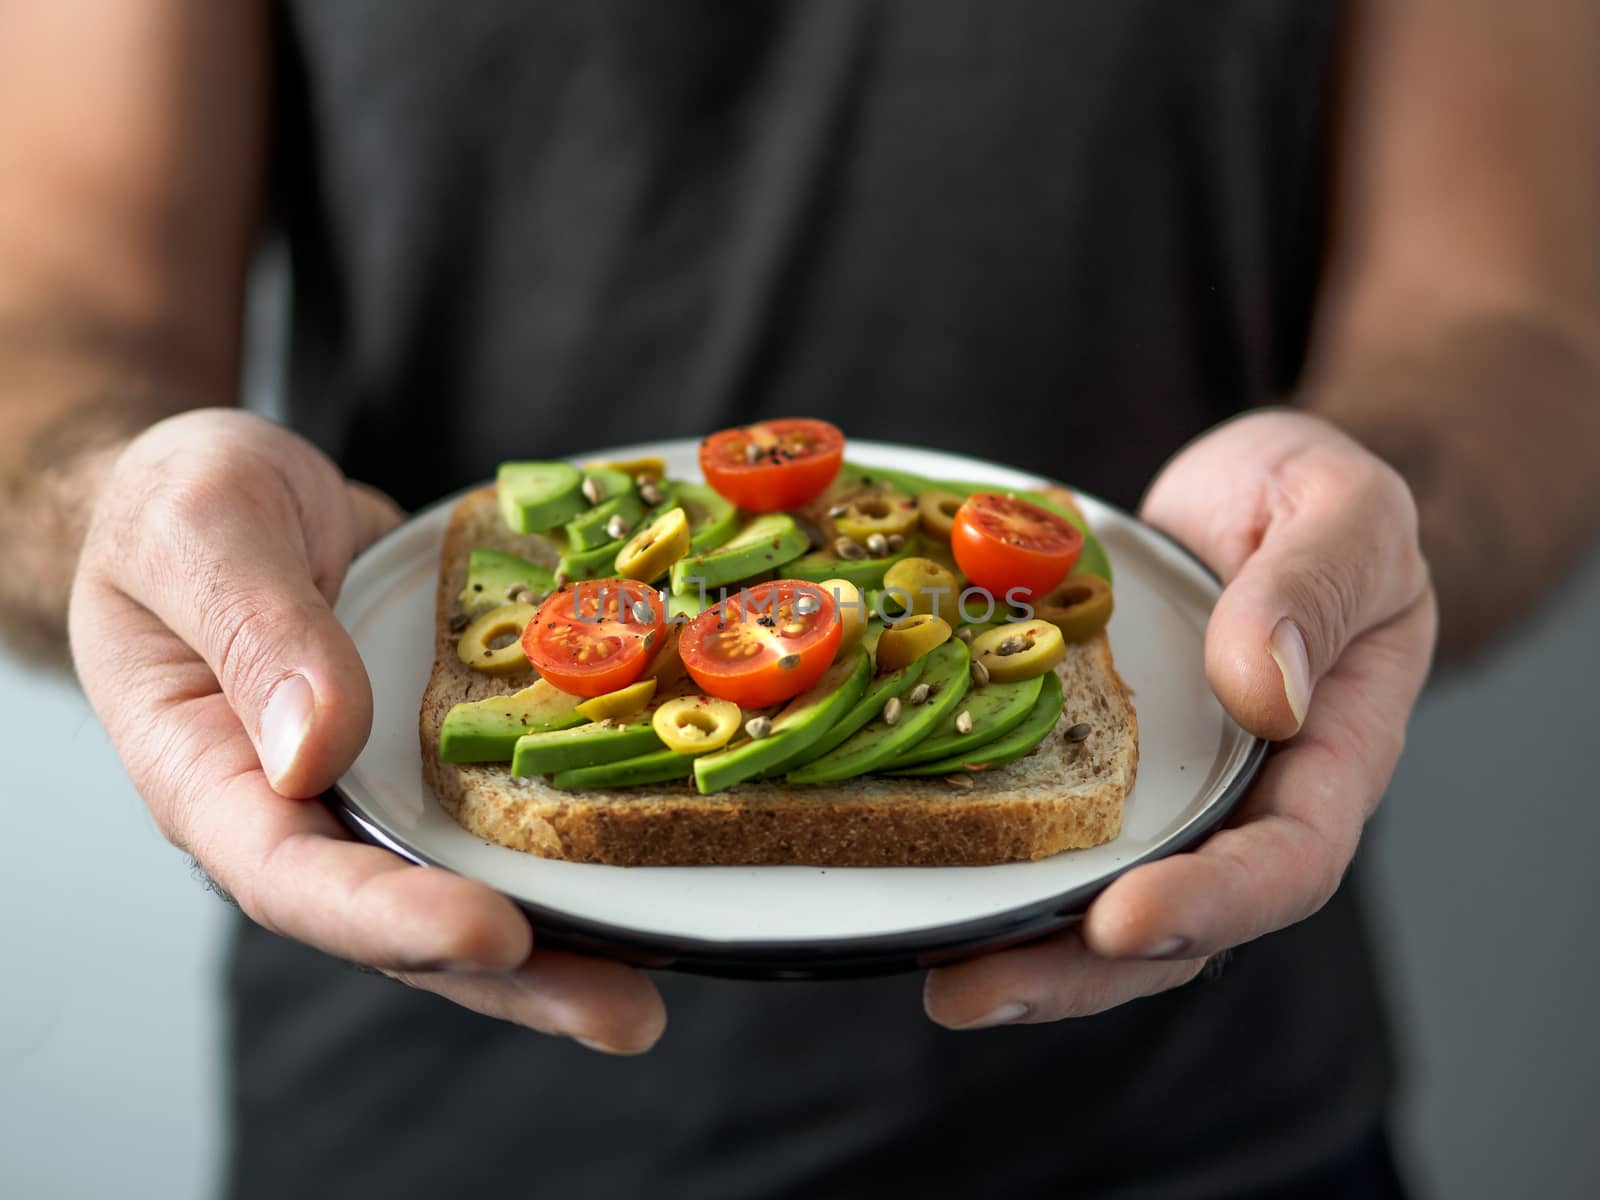 Hands takes plate with vegan sandwich. Healthy appetiezer - whole wheat bread toast with avocado, cherry tomatoes and olives